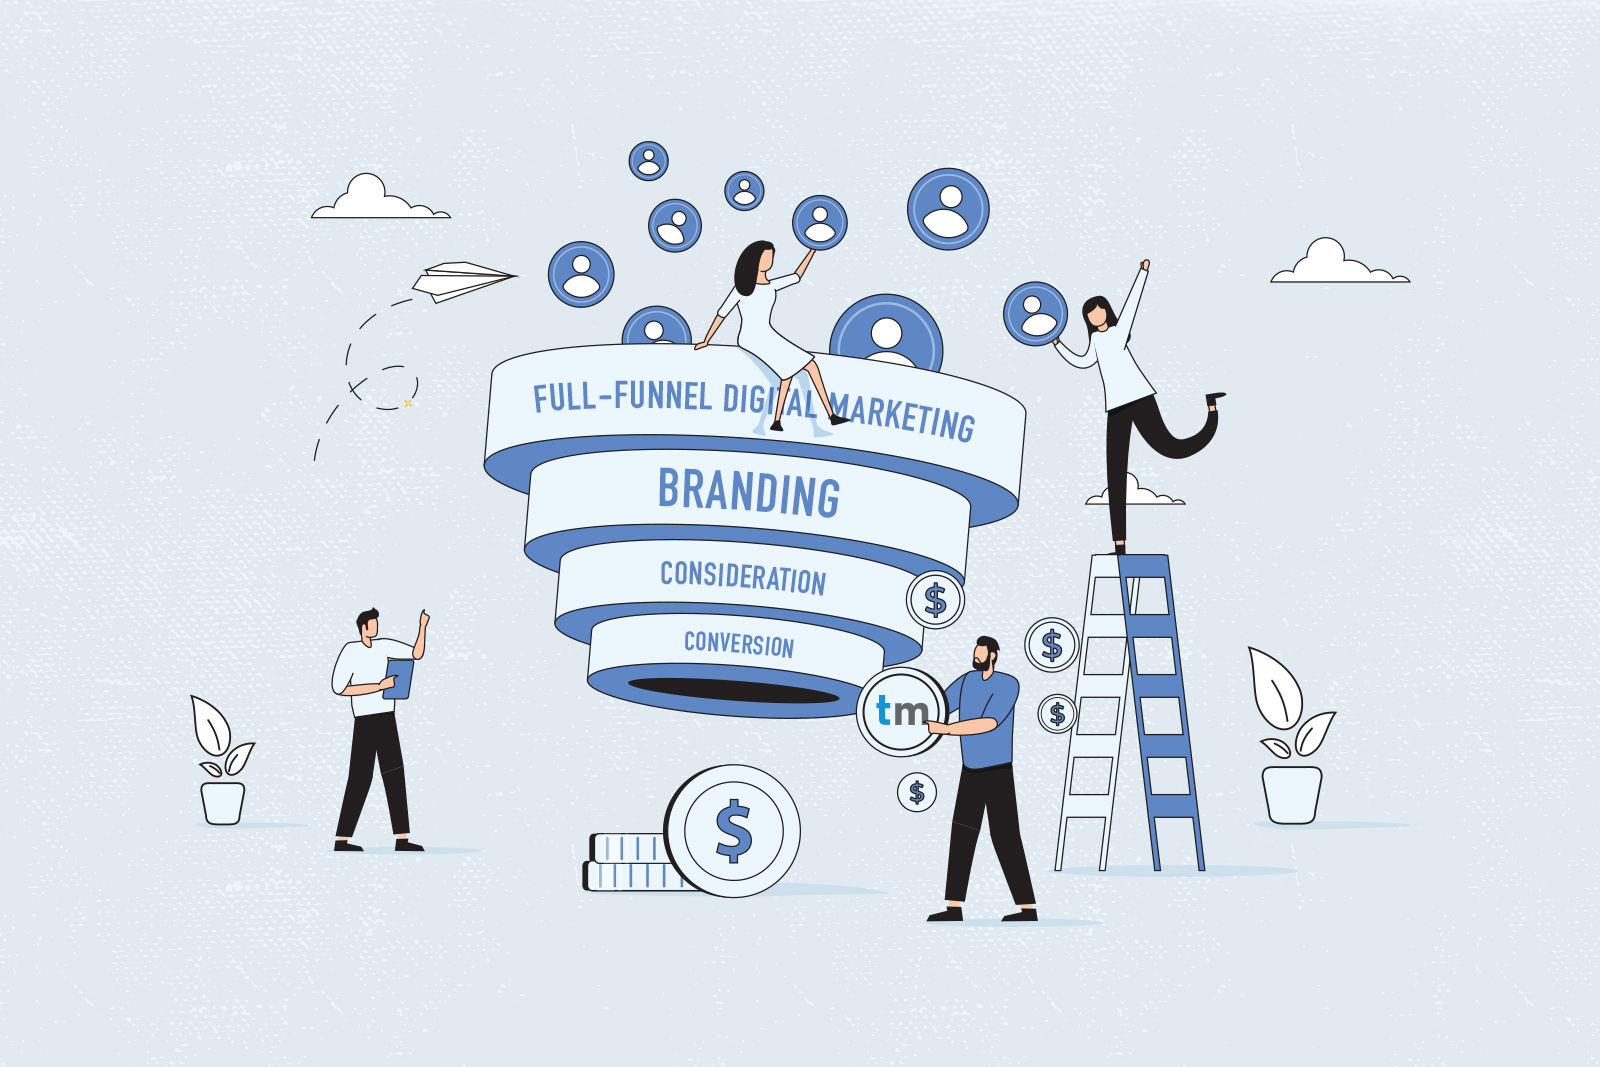 Cartoon Illustration of people using a Funnel of Digital Marketing to find customers and profit by putting profile icons into a funnel shape to produce coins.